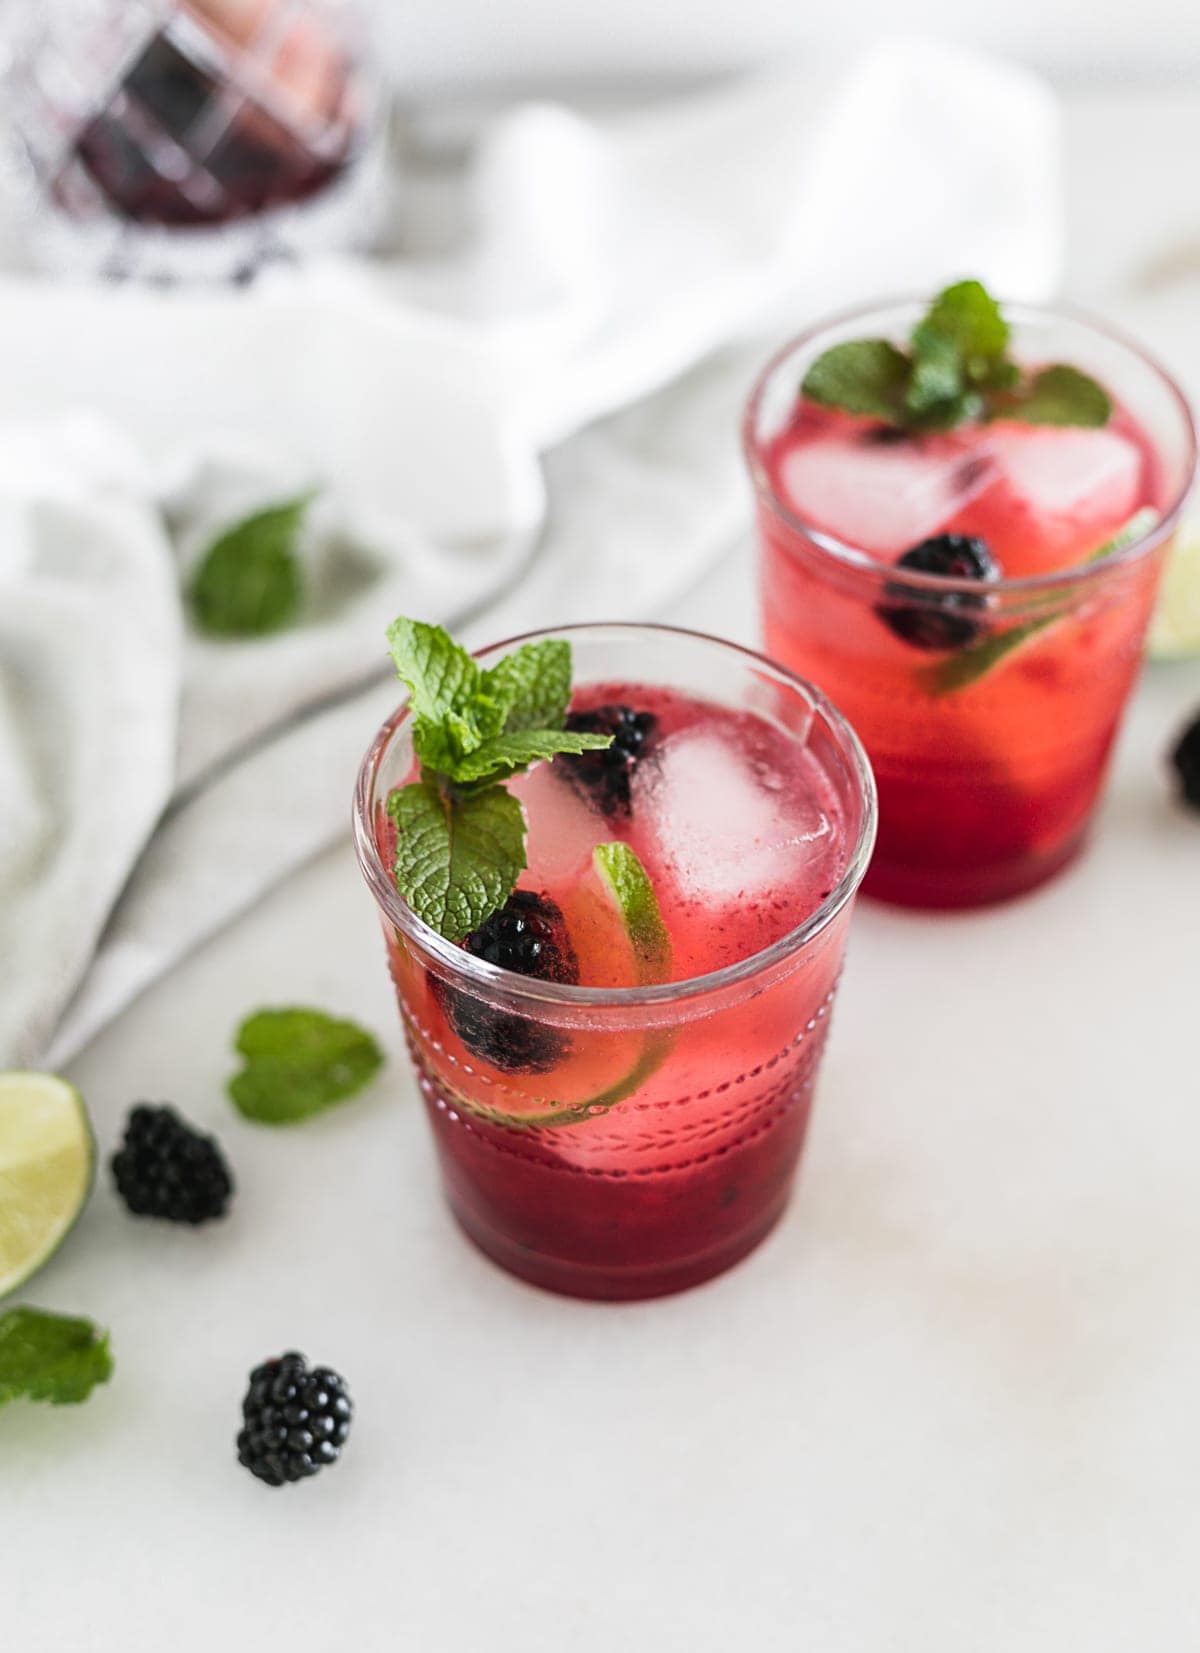 If you enjoy bourbon, you'll love this delicious blackberry bourbon smash, an bourbon cocktail with sweet summer blackberries, lemon and fresh muddled mint topped with bubbly soda. It's an easy and elegant summer sip! Via livelytable.com